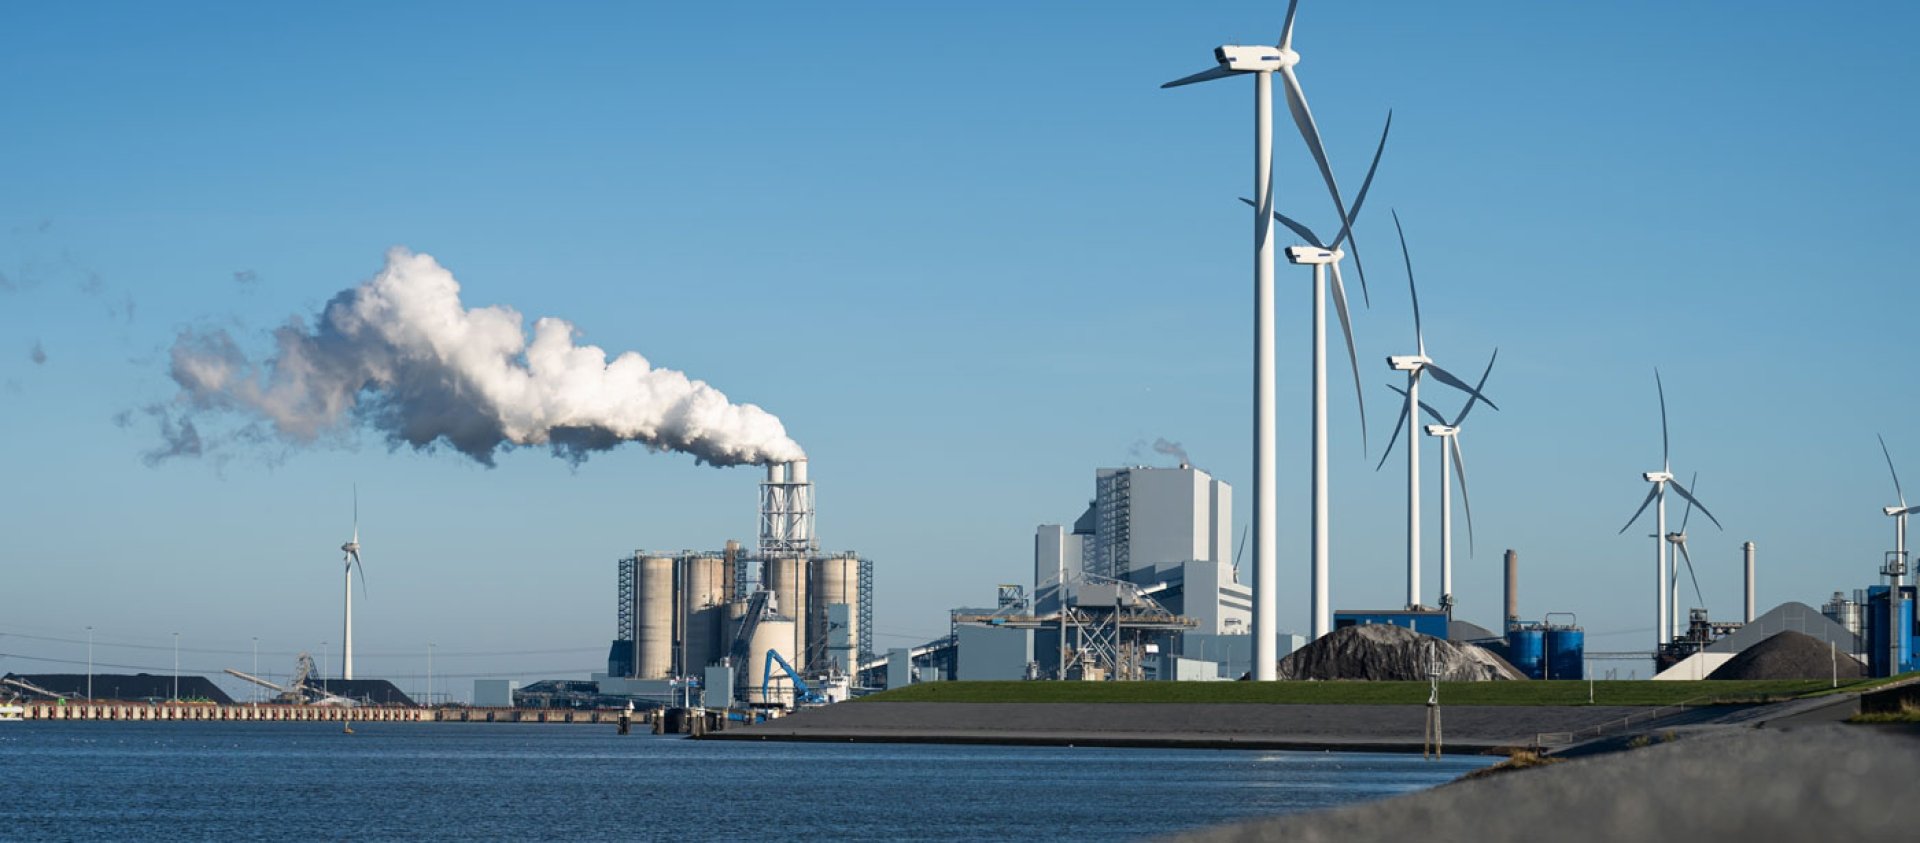 Fossil fuel (coal) power station and wind turbines in the Eemshaven generating power. Energy transition concept.